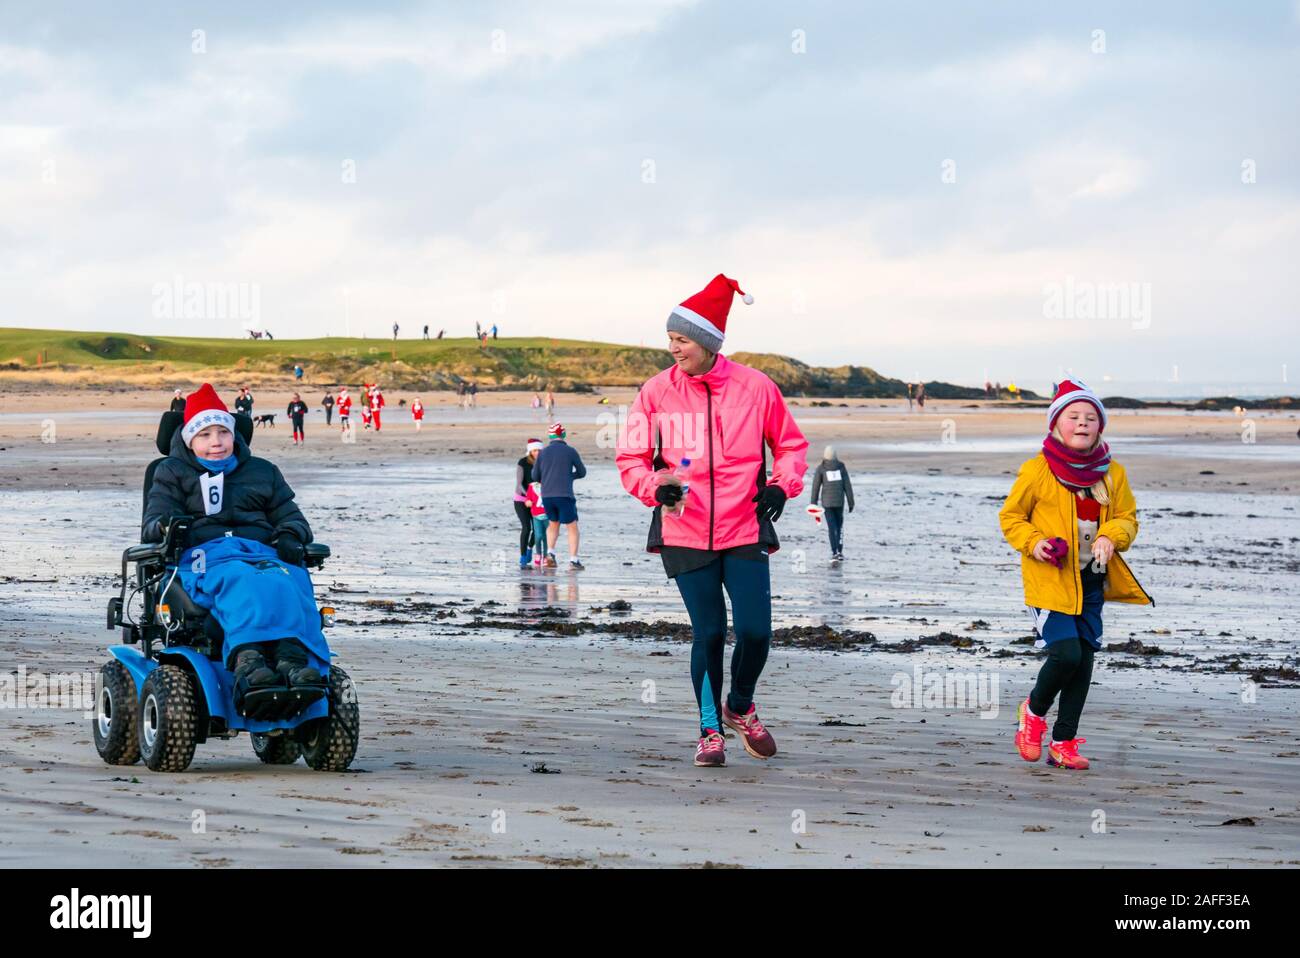 Mother with children with disabled boy in beach wheelchair in Santa run, North Berwick, East Lothian, Scotland, UK Stock Photo